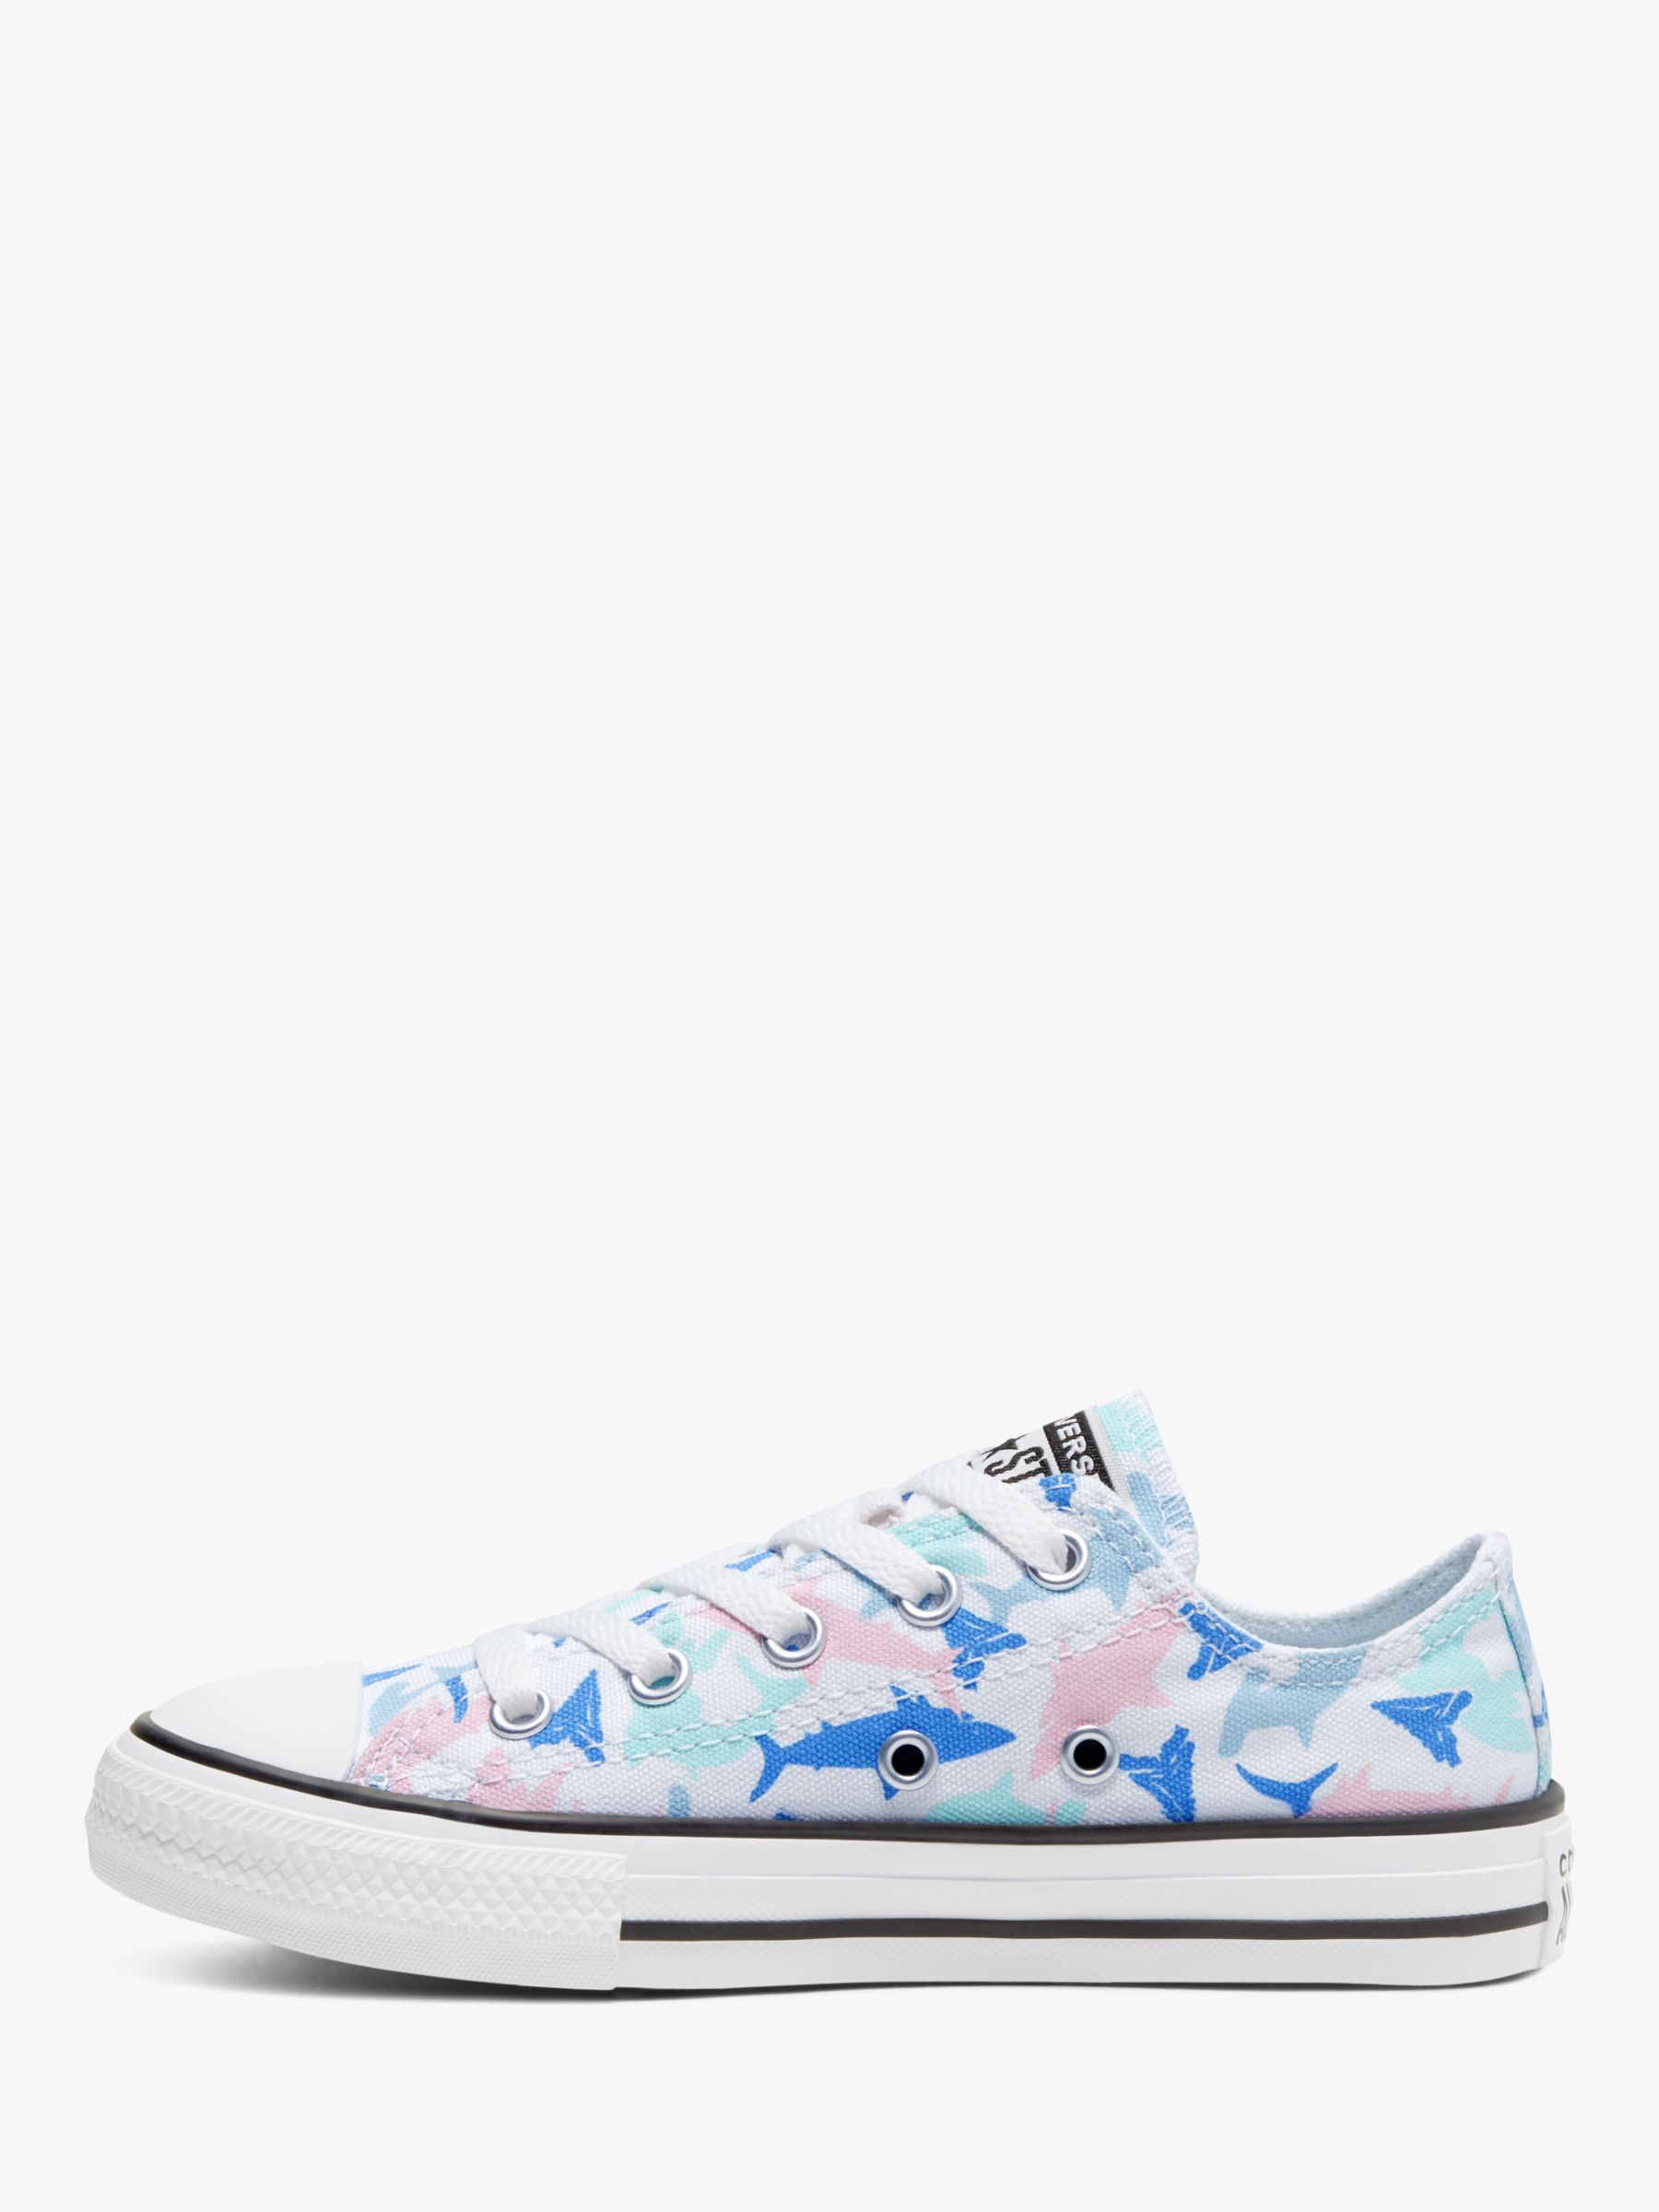 Converse Children's Chuck Taylor All Star Shark Bite Low Top Trainers ...